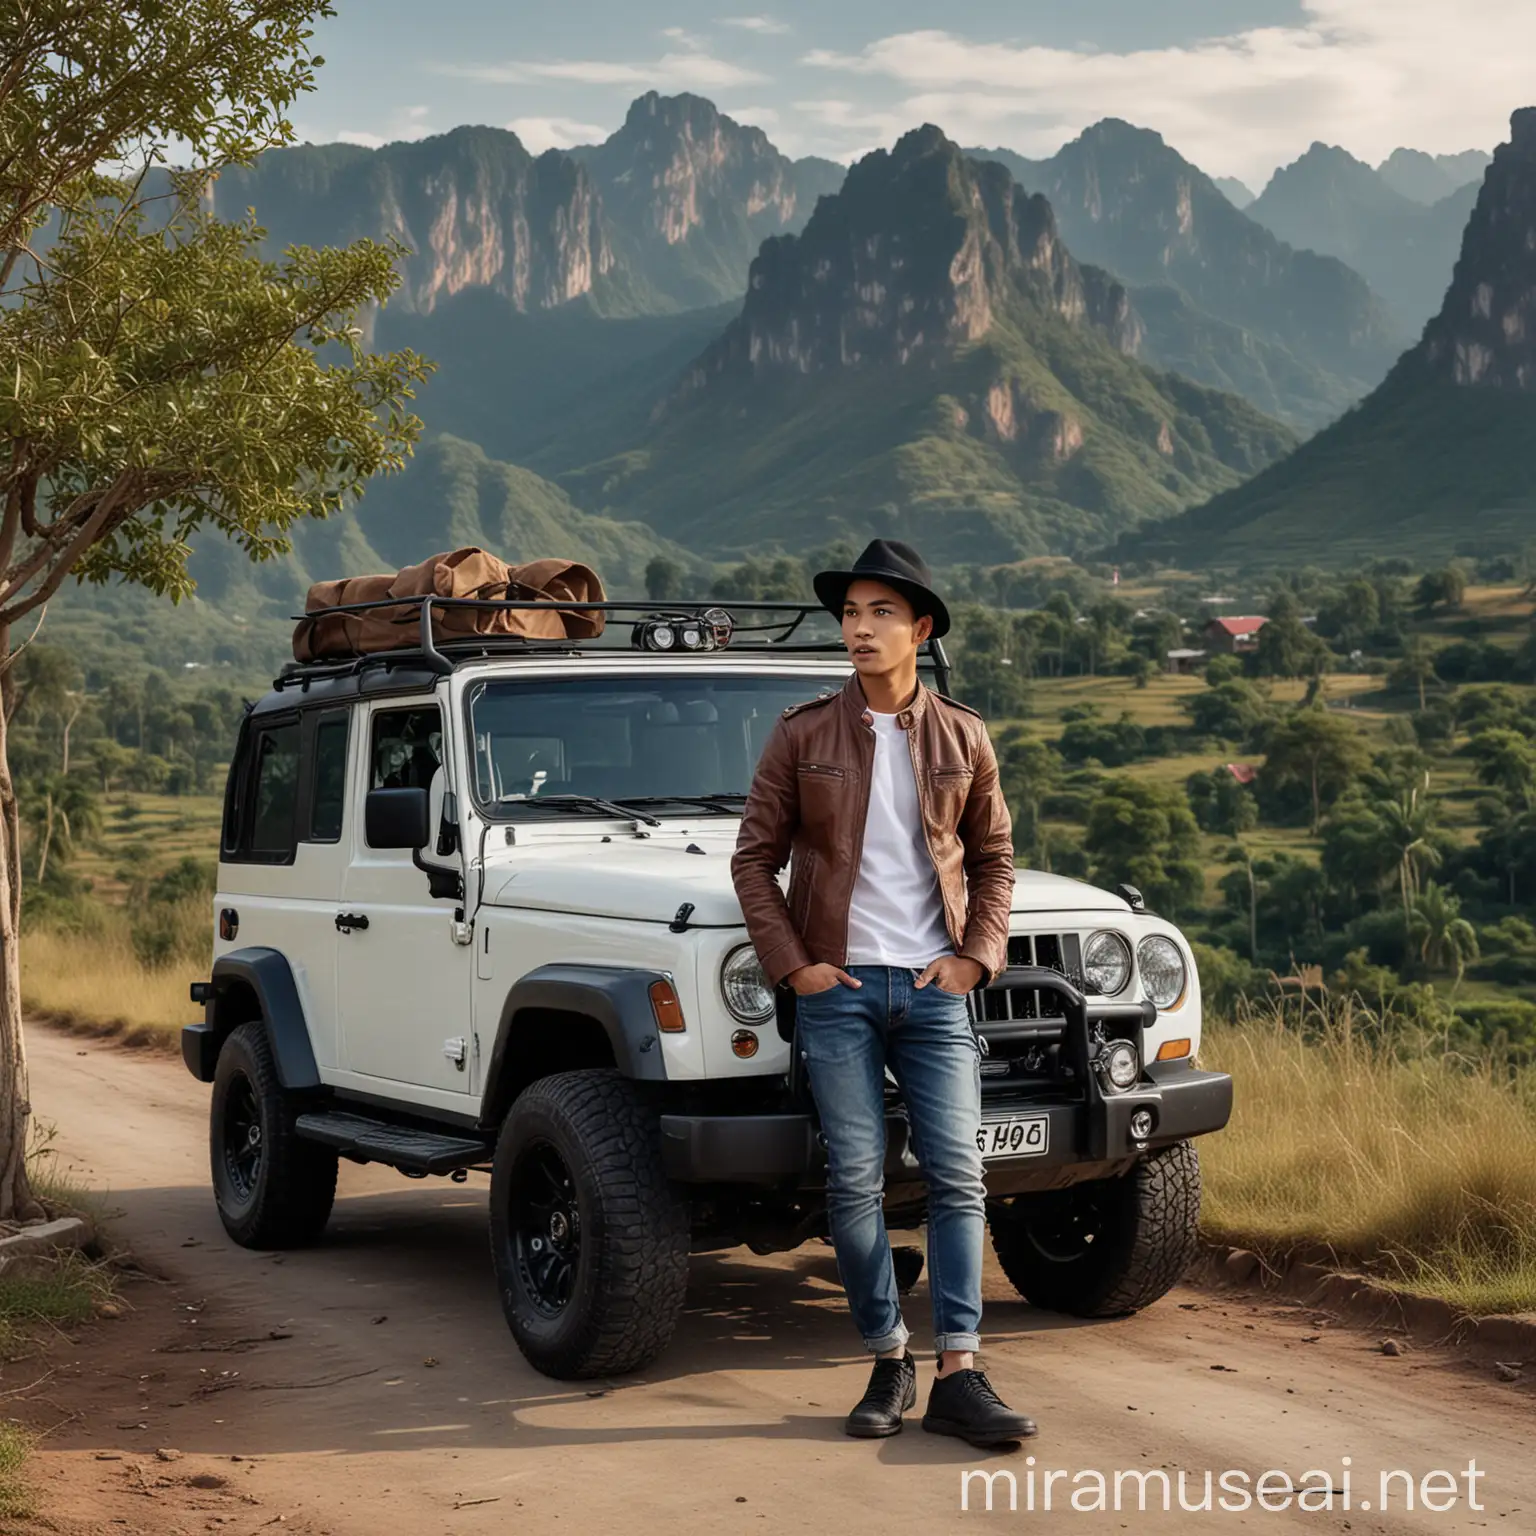 Stylish Indonesian Man in Nature Handsome 28YearOld Poses by Jeep and Mountains